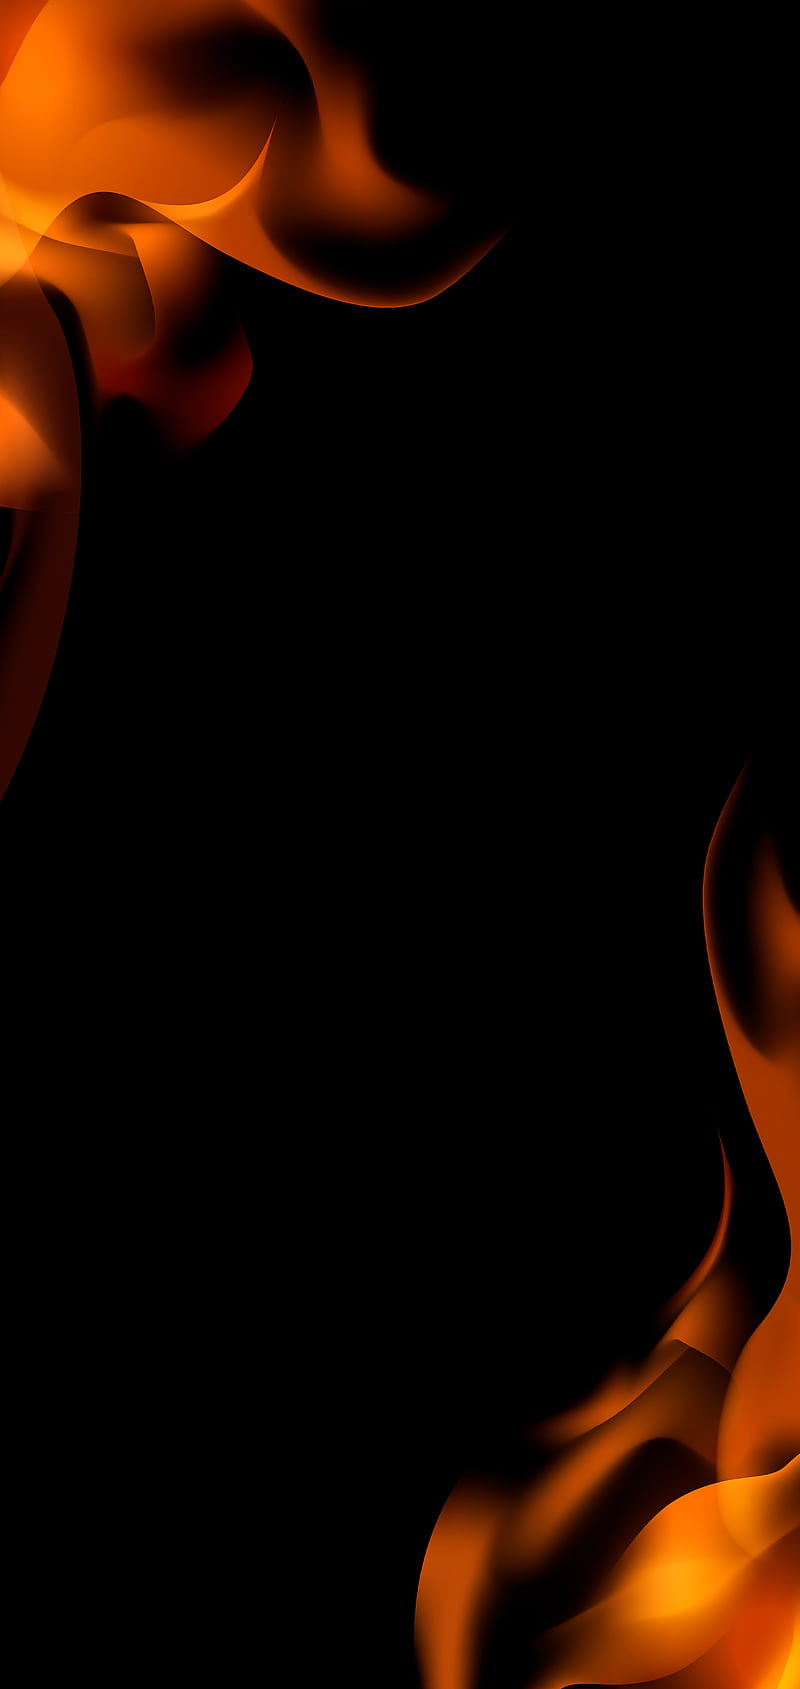 Free download dark black fire wallpapers hd fire wallpaper picture image  13jpg 1600x1000 for your Desktop Mobile  Tablet  Explore 76 Red Fire  Wallpaper  Fire Backgrounds Backgrounds Red Fire Background